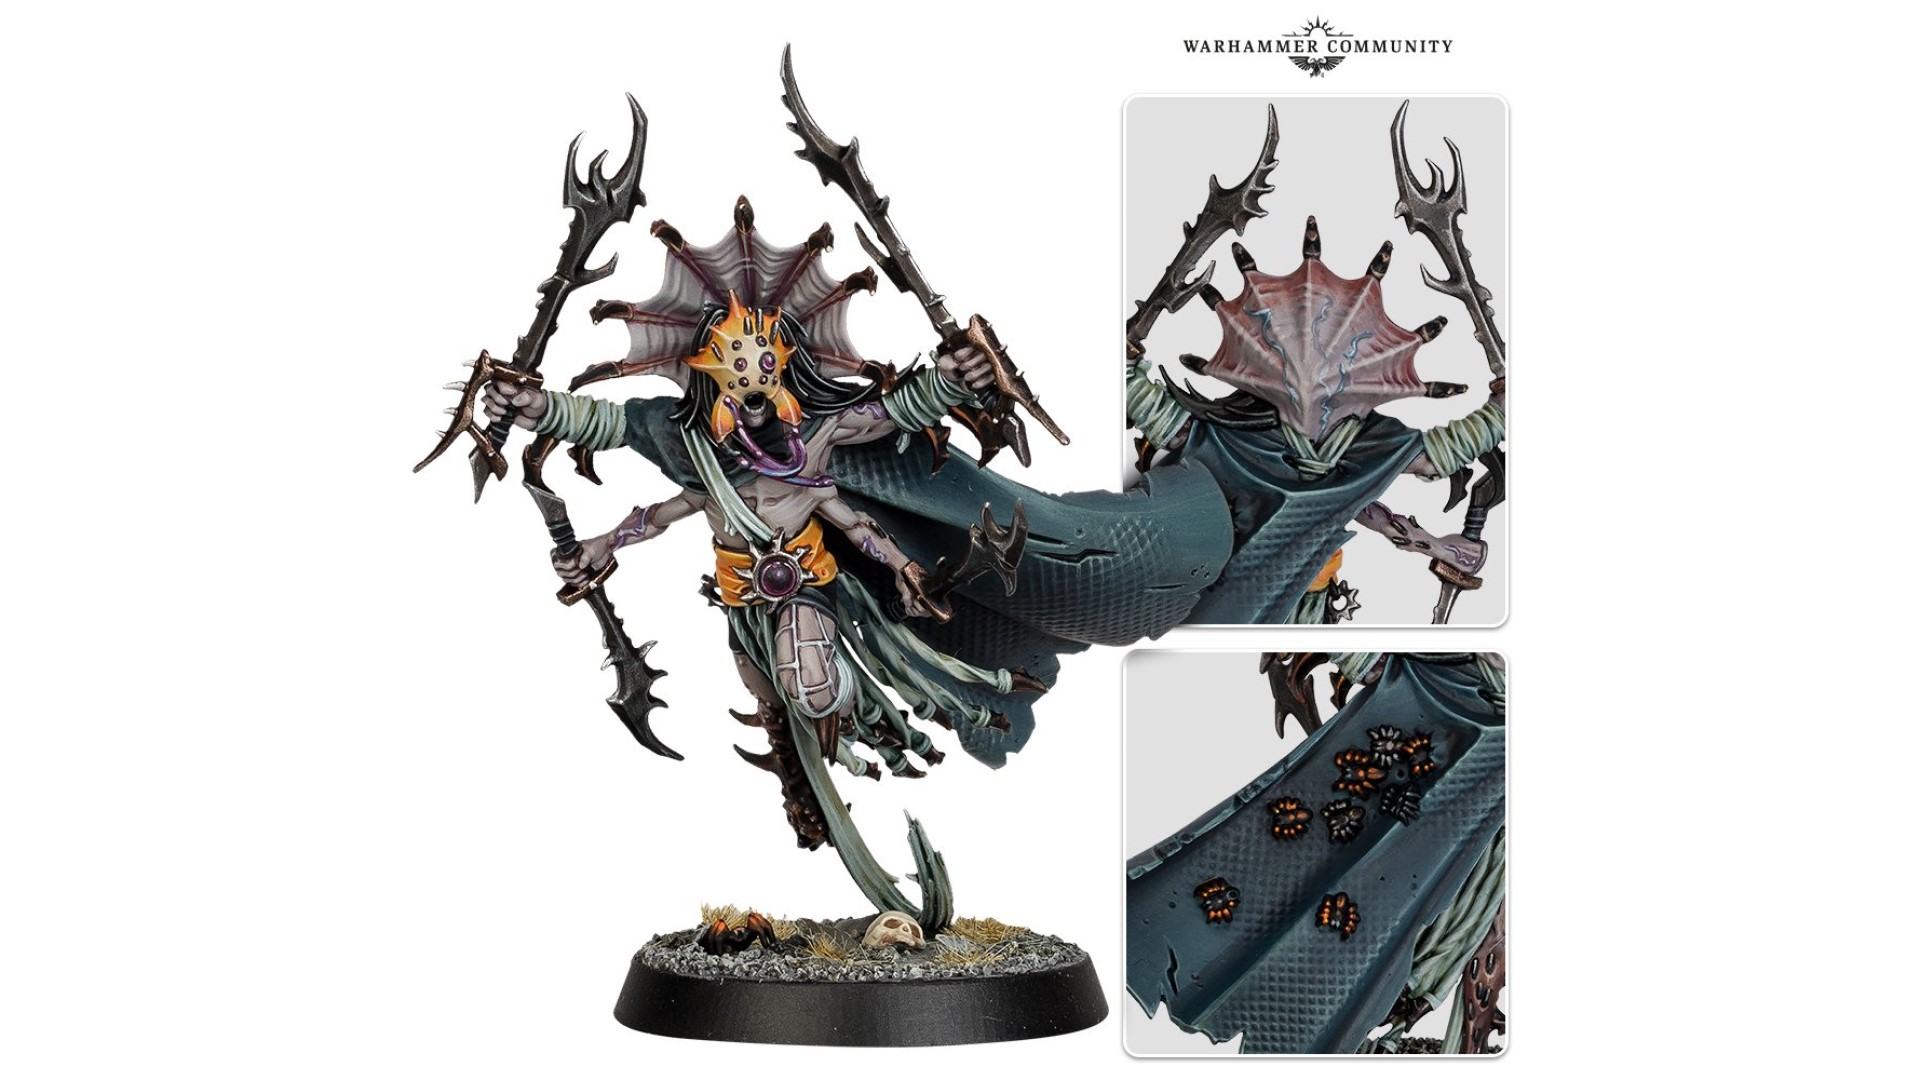 Warhammer Age of Sigmar: Warcry gets its very own spider man